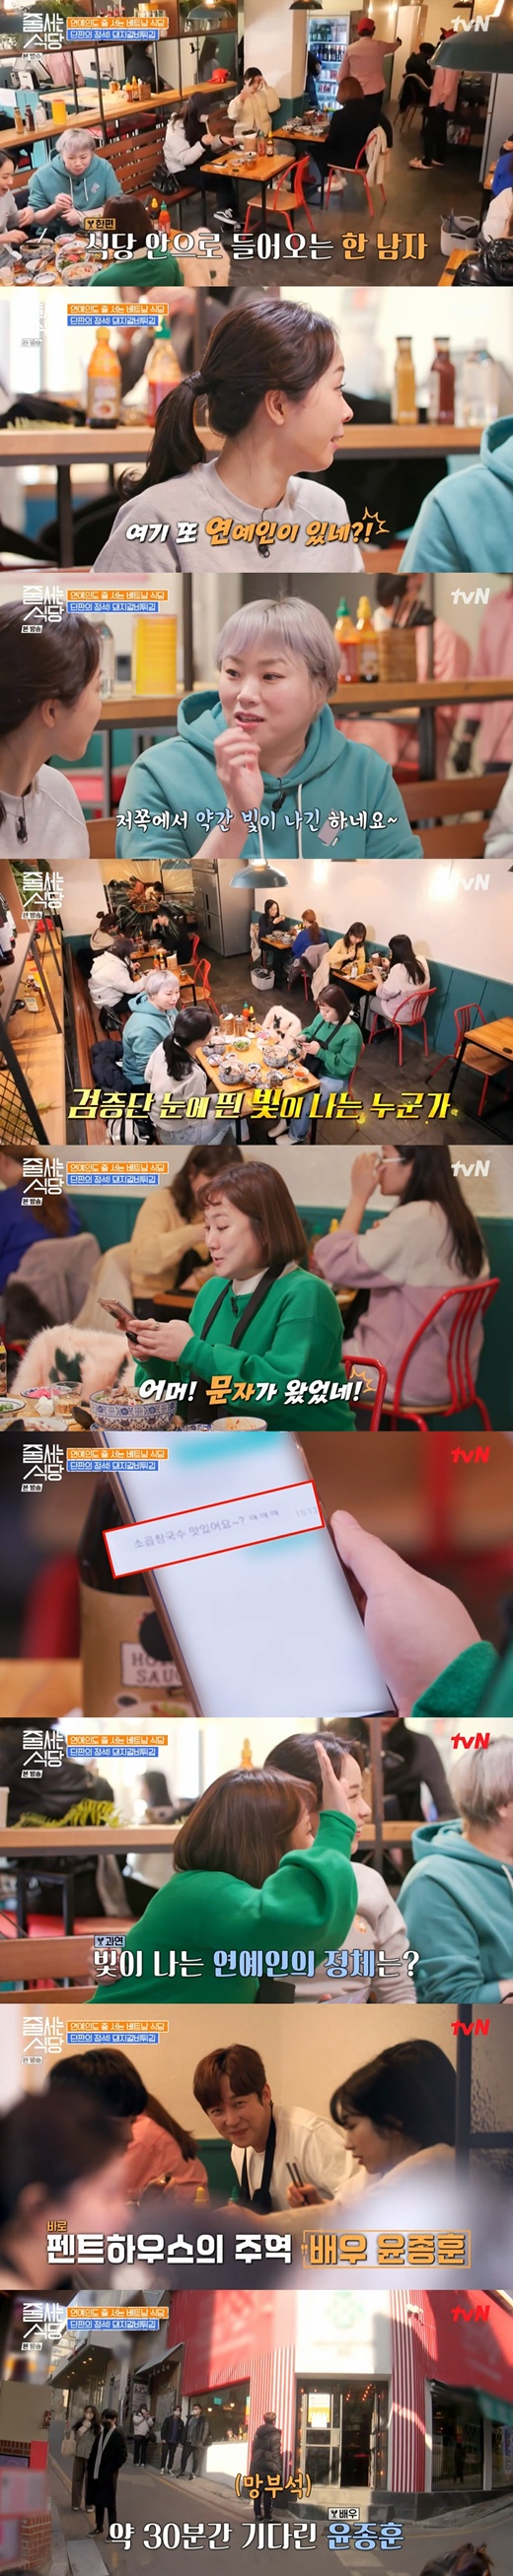 Broadcaster Park Na-rae met an unexpected celebrity during filming.In the cable channel tvN a lined restaurant broadcasted on the afternoon of the 21st, Park Na-rae, short-lipped sun, and cooking researchers were drawn to visit the rice noodle Good restaurant.On this day, Park Na-rae, short-lipped sunshine, and Jung-na gathered in the middle of Gangnam Station.Restaurant, who visited the restaurant because he had a delicacy called spicy sokkokchang rice noodles, proved his reputation as a long waiting person even after lunch time.In particular, they said, This is Baro entertainer Good restaurant.Park Na-rae explained, I was here to follow my brother Sung Si Kyungs SNS. I also raised my expectations by saying, Shin Se Kyung, Jeon Ji Hyun and Ishian came.After 40 minutes, three people finally ate food. One man walked into the Restorant while continuing Mukbang.There is another entertainer here, he said, and the short-lipped sun also wondered about the identity of the man, saying, It shines on that side. Park Na-rae laughed, saying, Oh, the letter came.The person who sent Park Na-rae a message to Soon-Chang is delicious ~   was actor Yoon Jong-hoon who appeared in Baro Penthouse.Yoon Jong-hoon smiled broadly and gestured to share a snow greeting with the verification team and eat deliciously.Meanwhile, the camera also caught the scene of Yoon Jong-hoon waiting for 30 minutes outside Restaurant, proving that entertainers are good restaurants to eat in line.